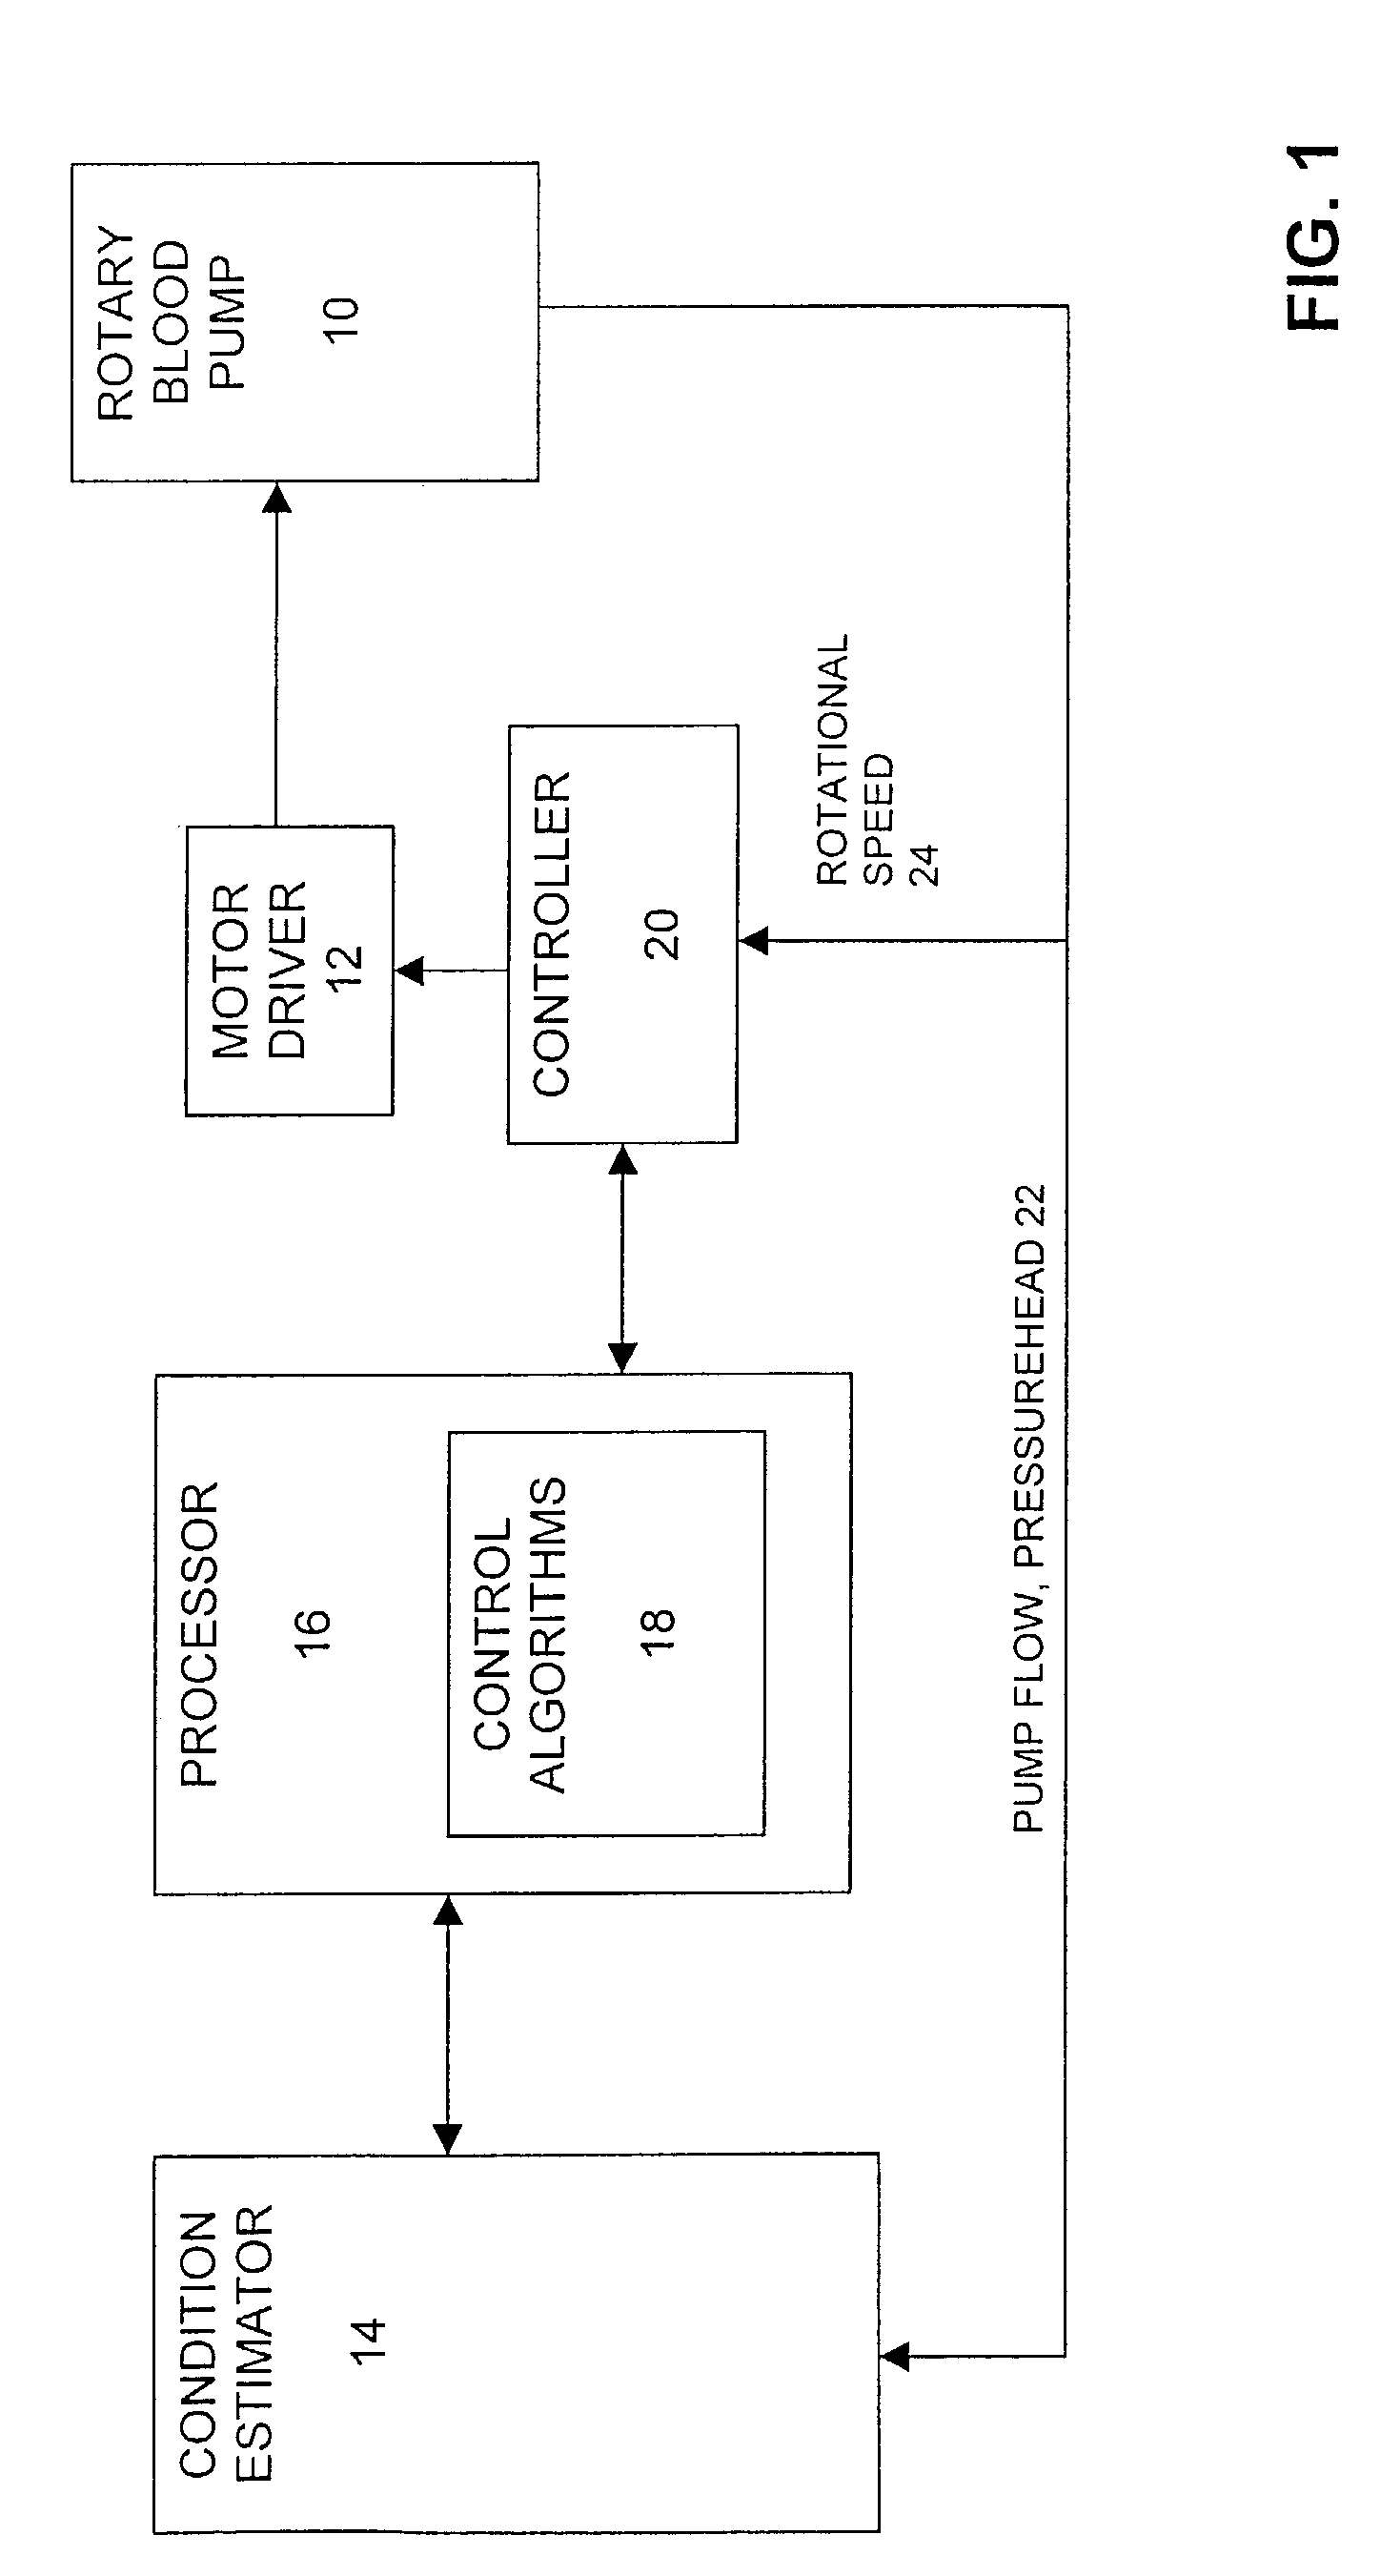 Methods and apparatus for controlling a continuous flow rotary blood pump